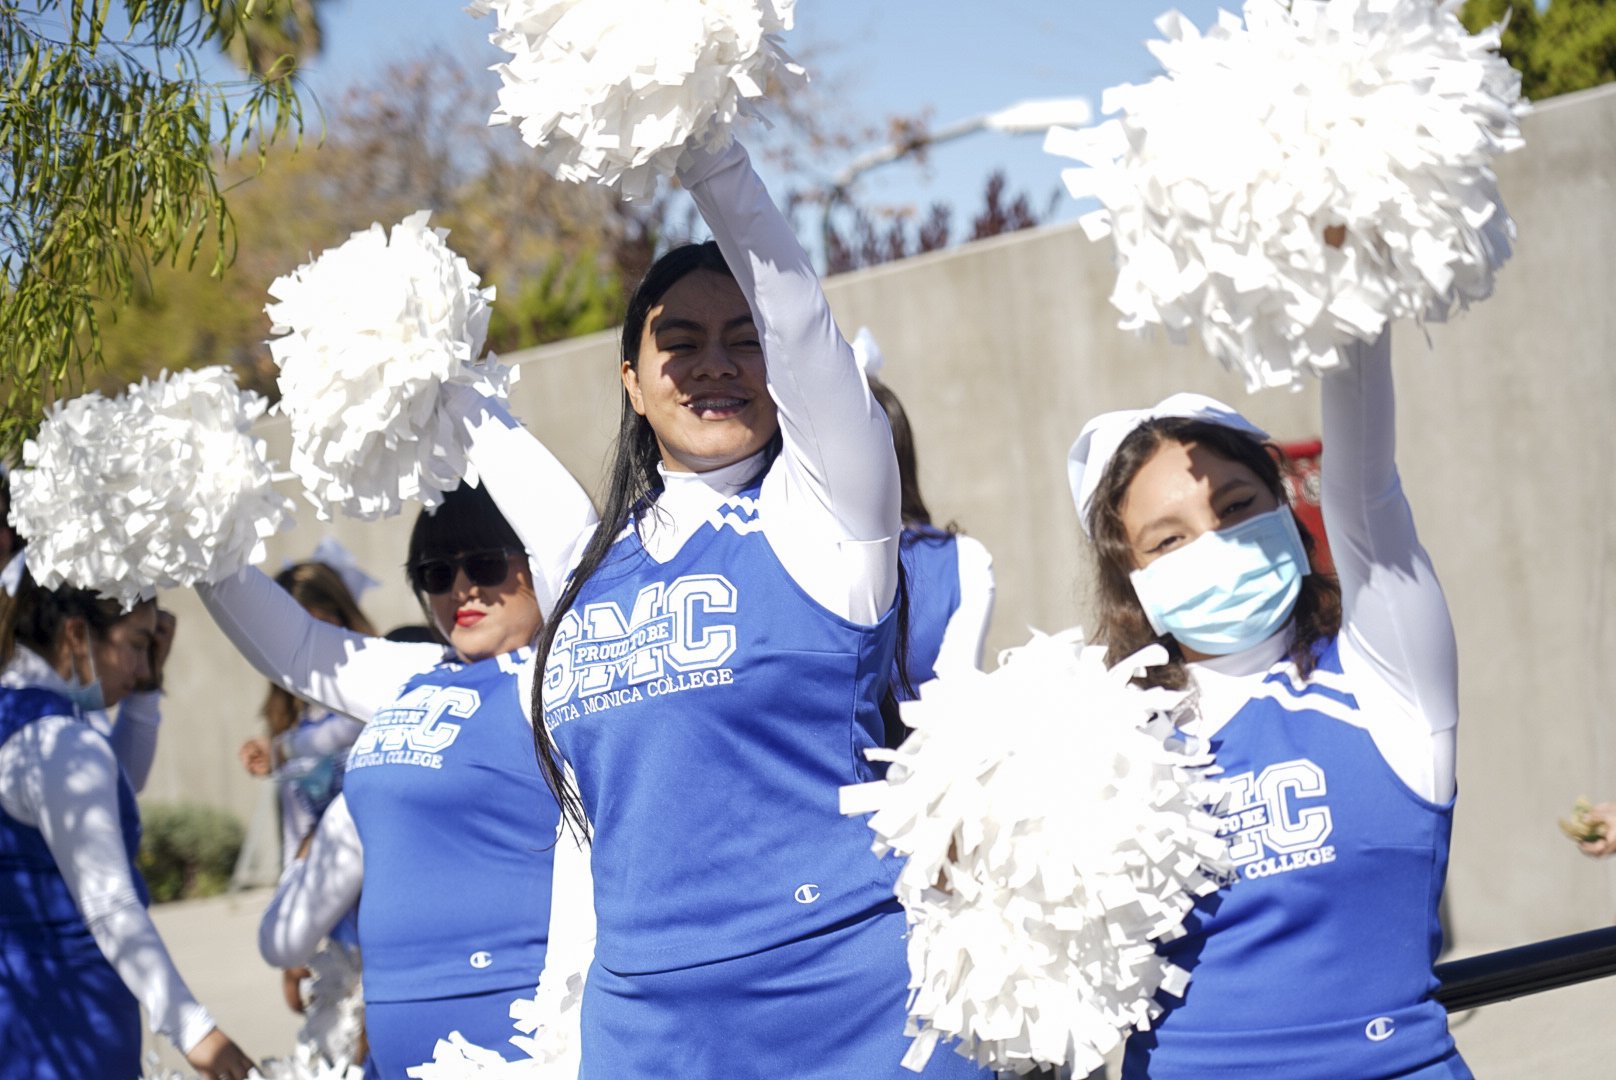  Santa Monica College Corsair Cheerleaders pose for a photo  during Santa Monica College's 3rd Giving Thanks(Giving) charity food distribution event Tuesday, Nov. 22 2022. The drive-thru market featured free care packages designed to ease the burden 